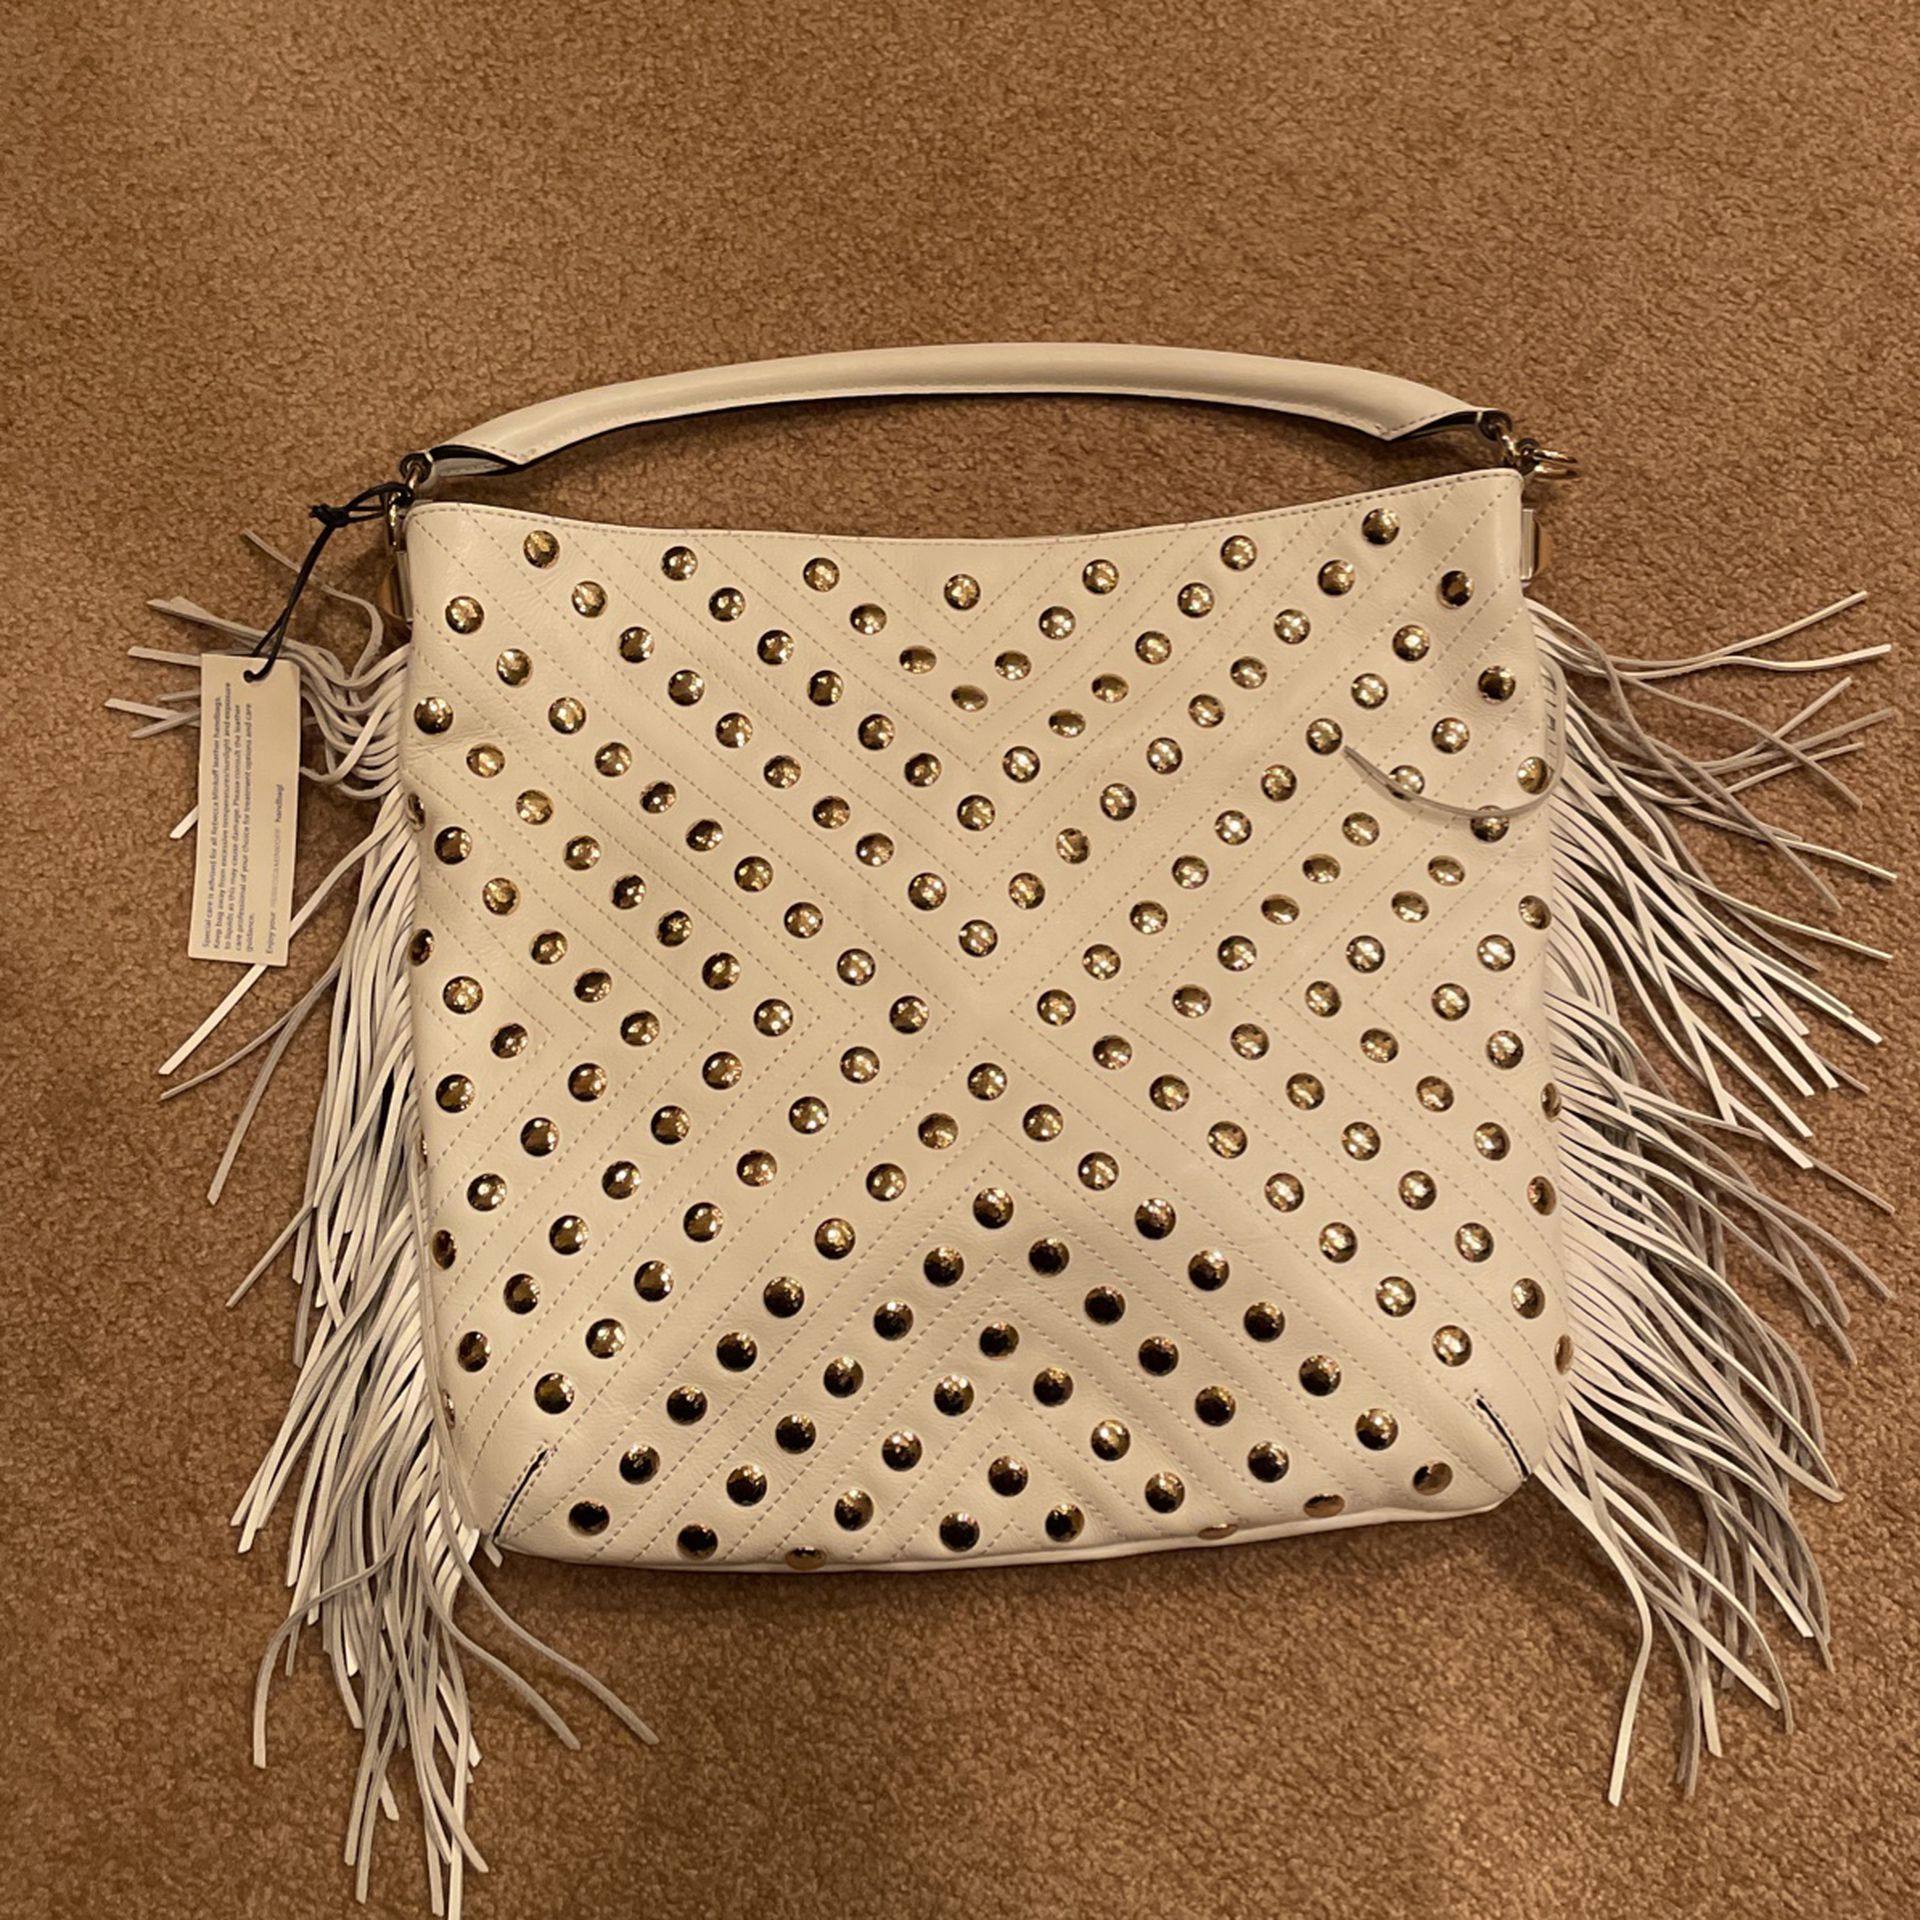 Brand New with tags - Rebecca Minkoff Bag